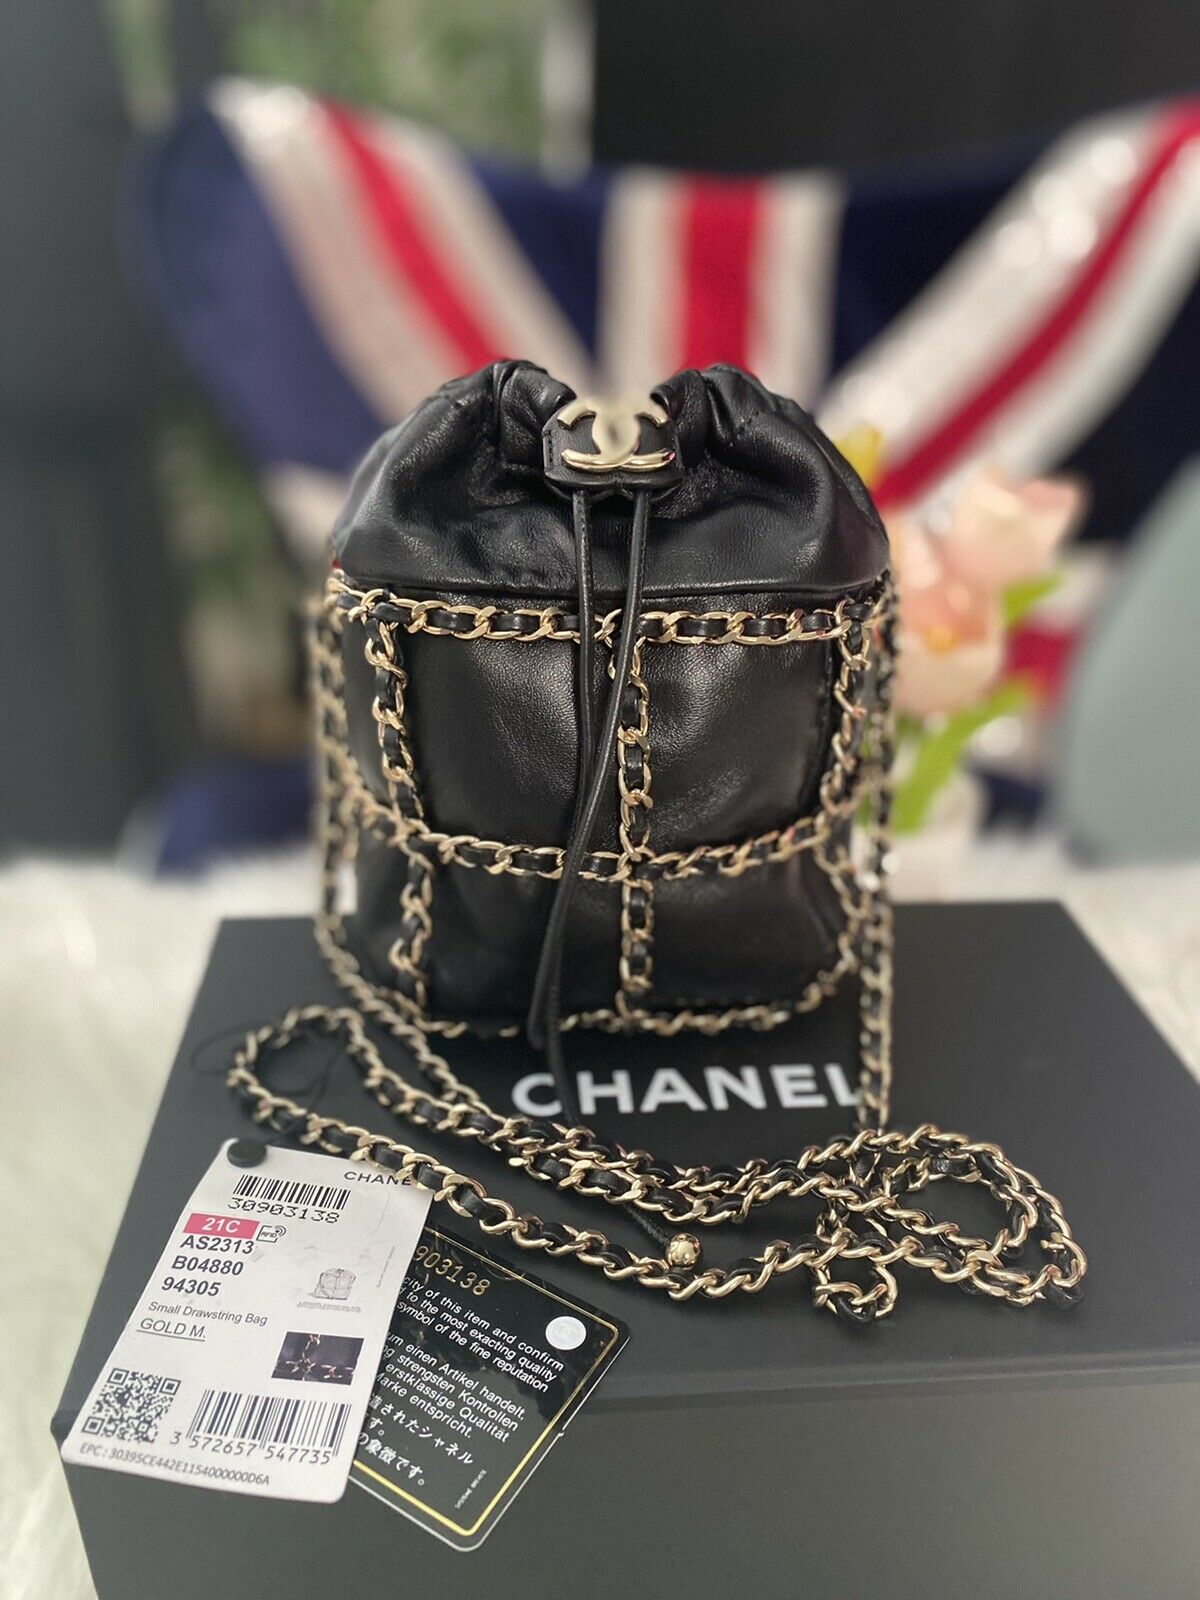 Authentic* Chanel *BRAND NEW* Mini Bucket Bag with Chain (Chanel Drawstring)